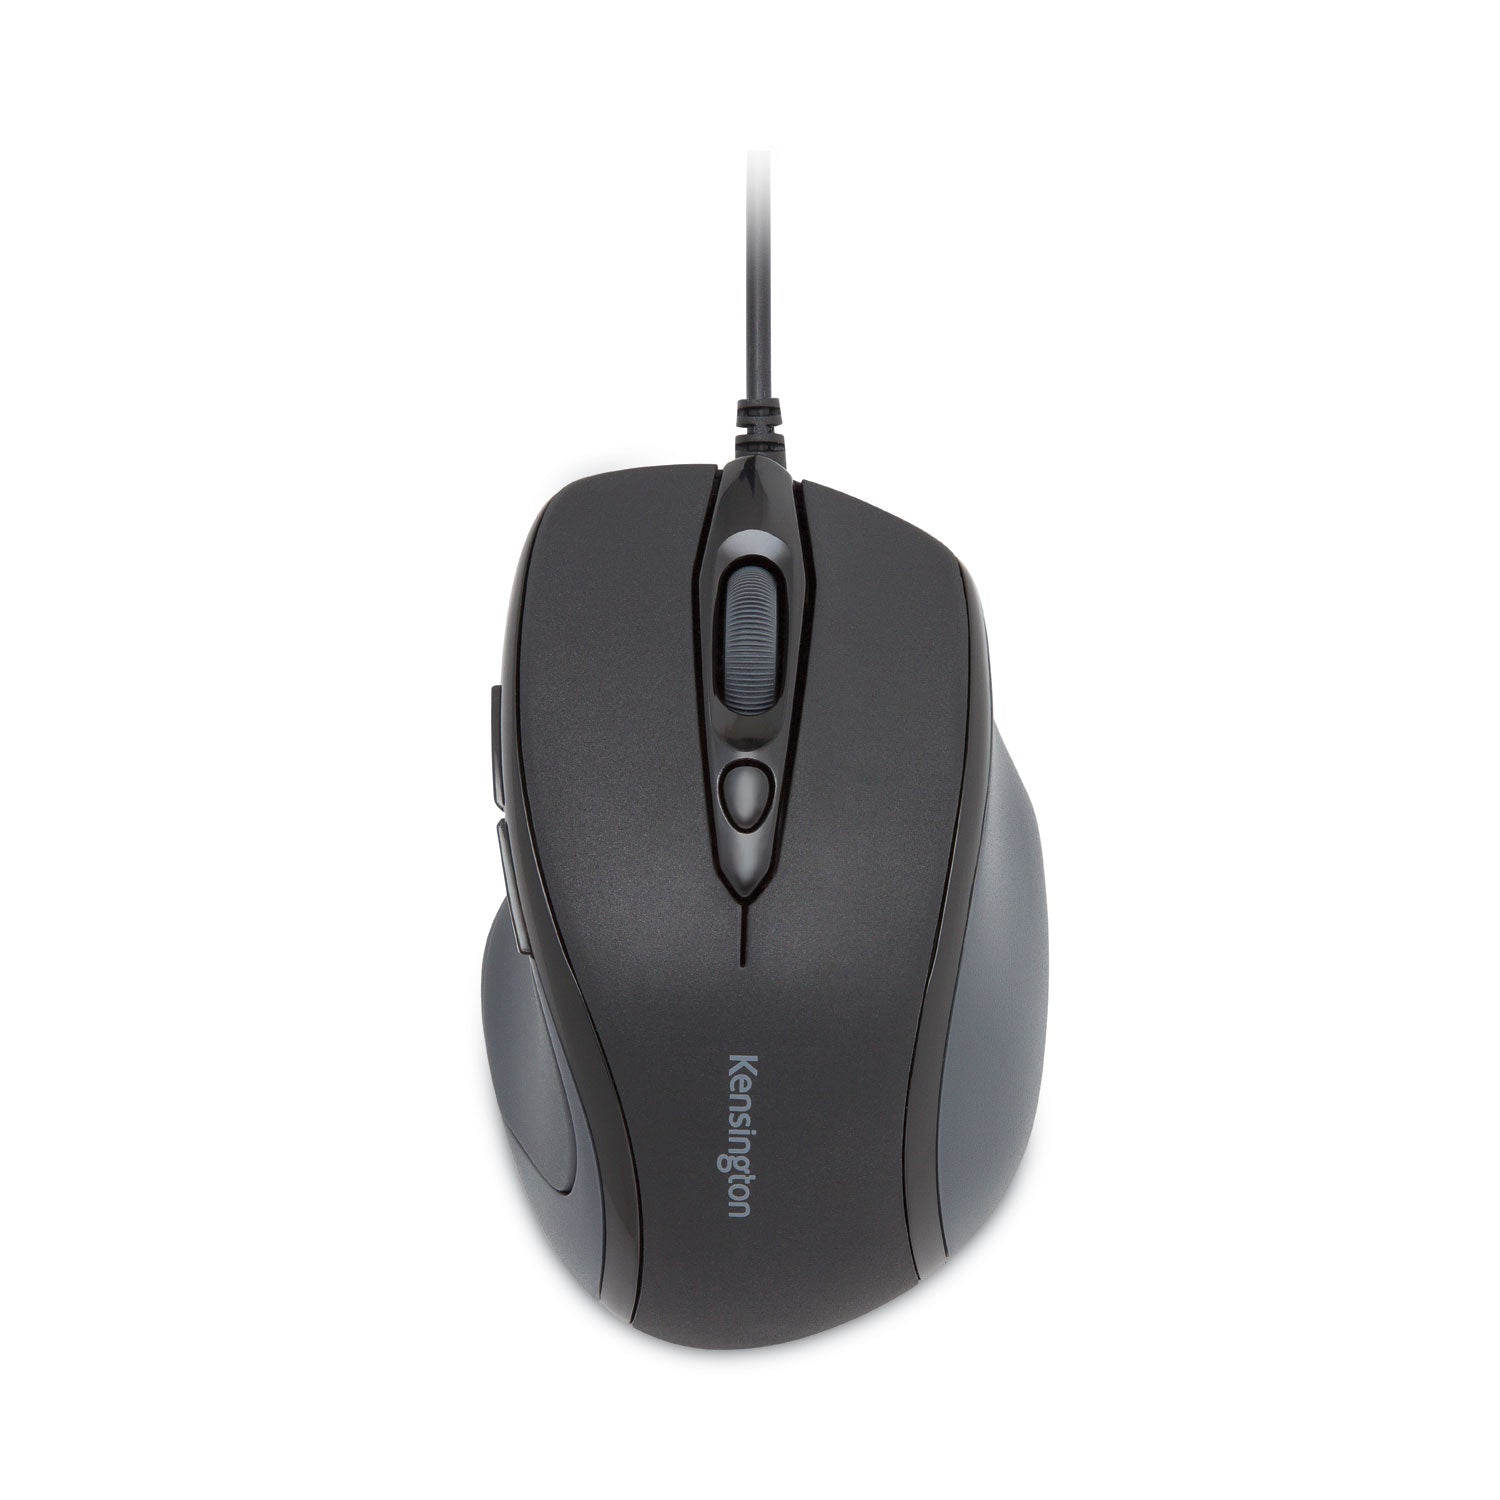 Pro Fit Wired Mid-Size Mouse, USB 2.0, Right Hand Use, Black - 